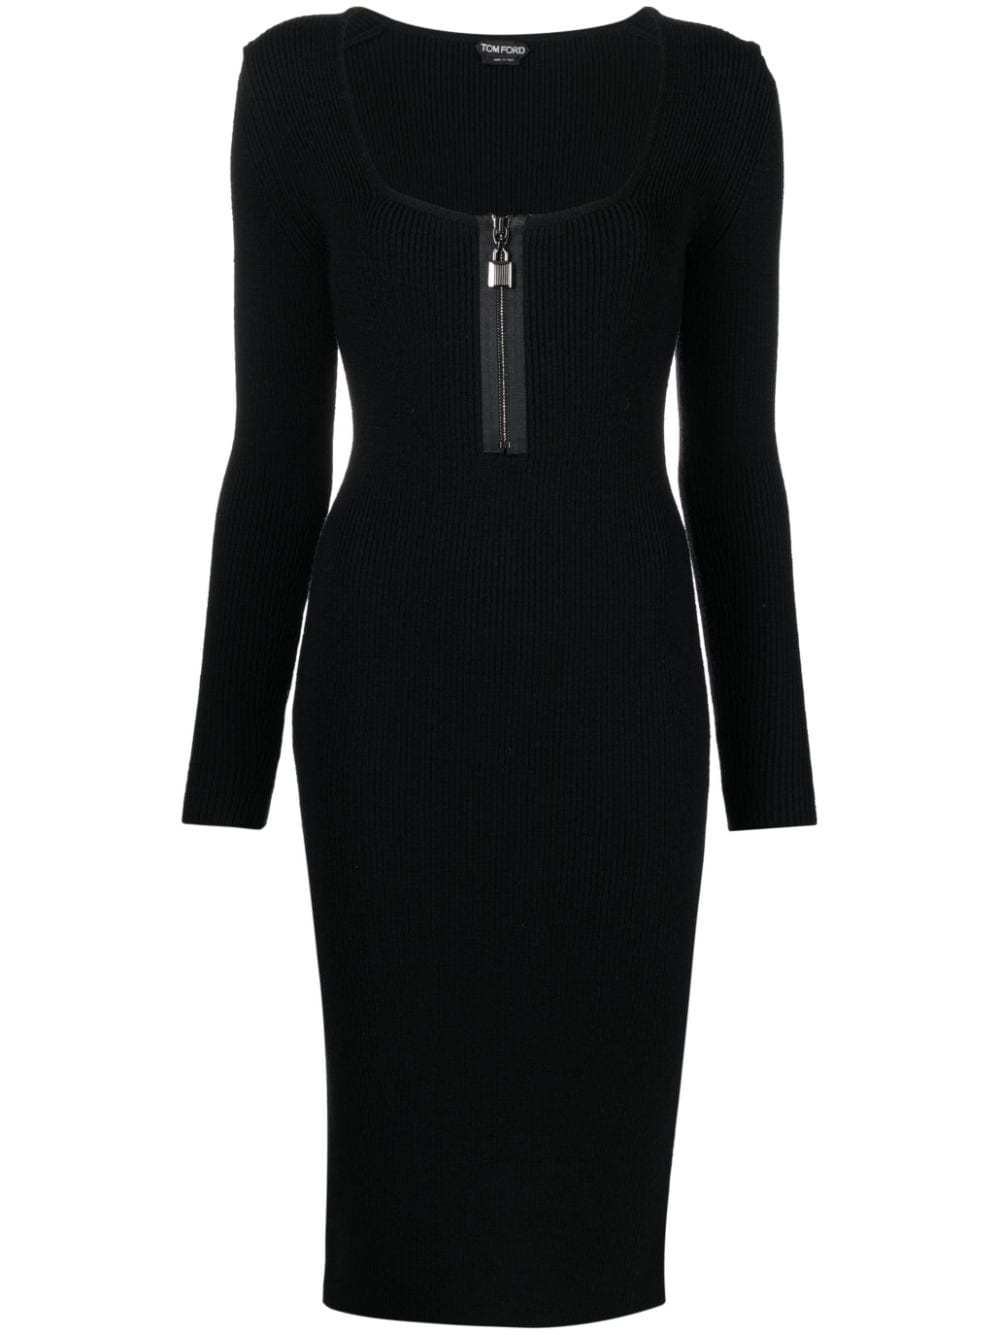 TOM FORD FRONT-ZIP KNITTED DRESS